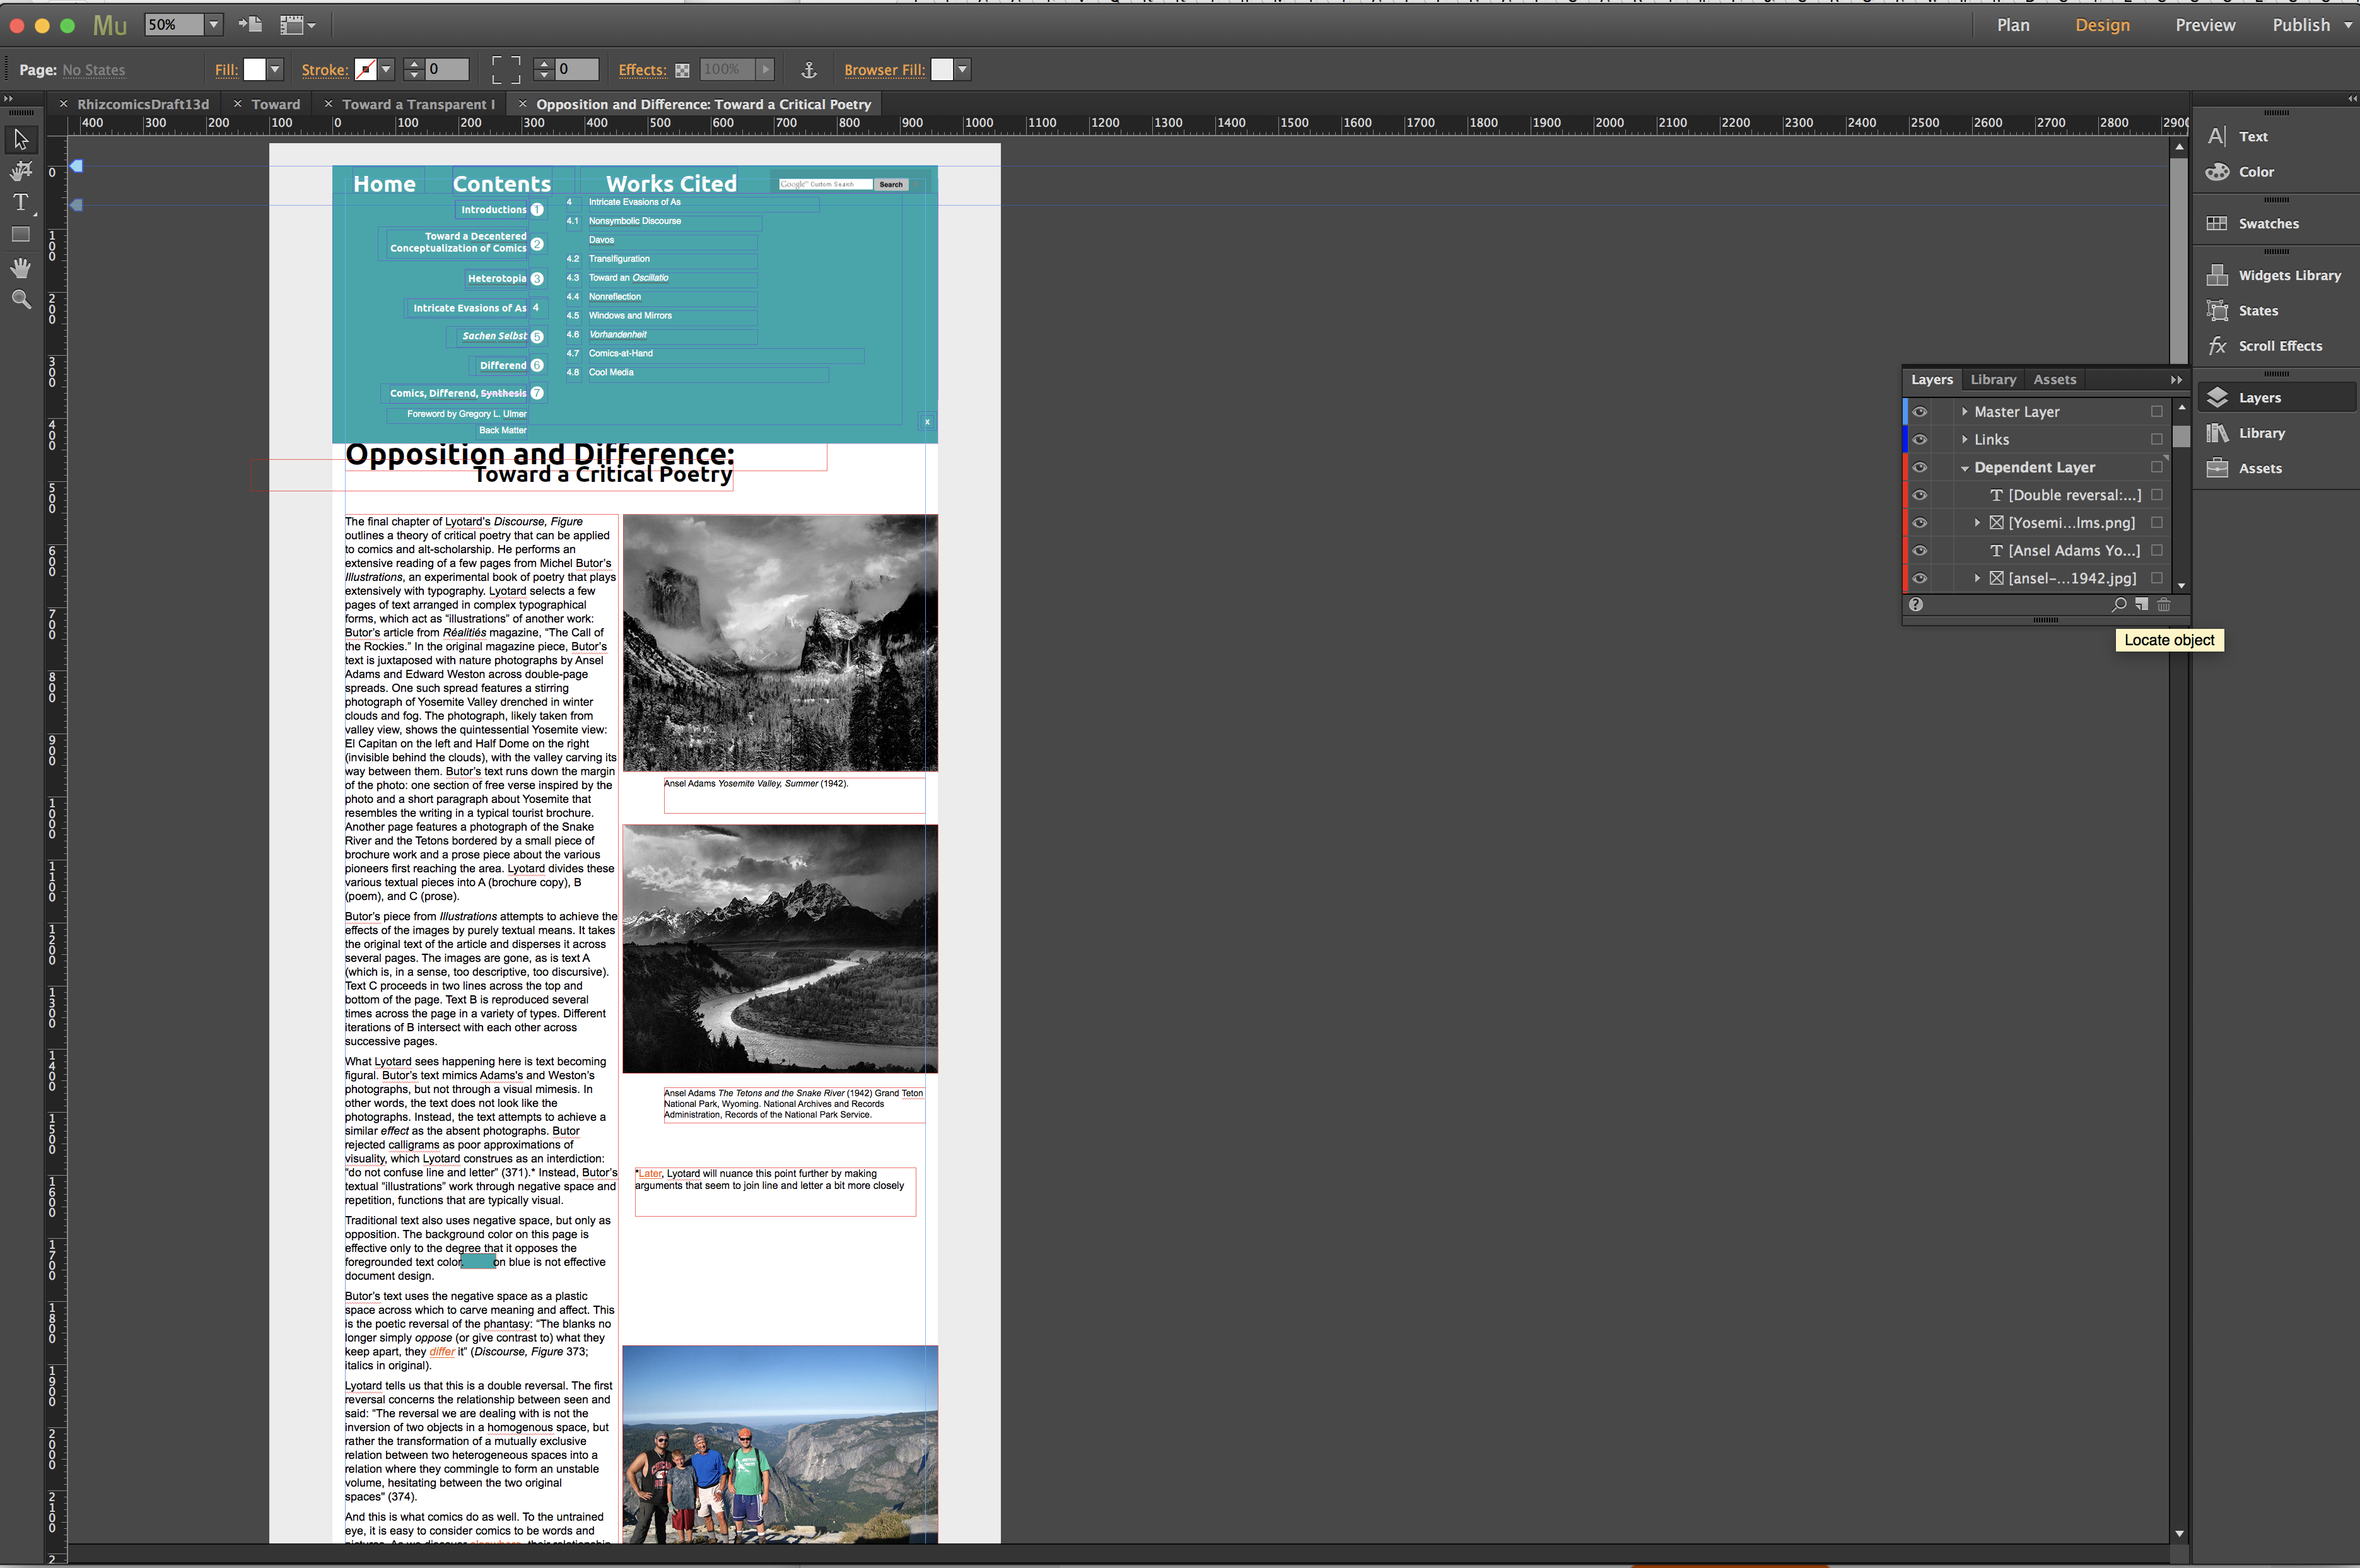 Adobe Muse workspace displaying a horizontal navigation bar at the top with Home, Contents, and Works Cited links, with a menu of links below, and under those, a heading that says Opposition and Difference, with text and images of mountains and canyons below that